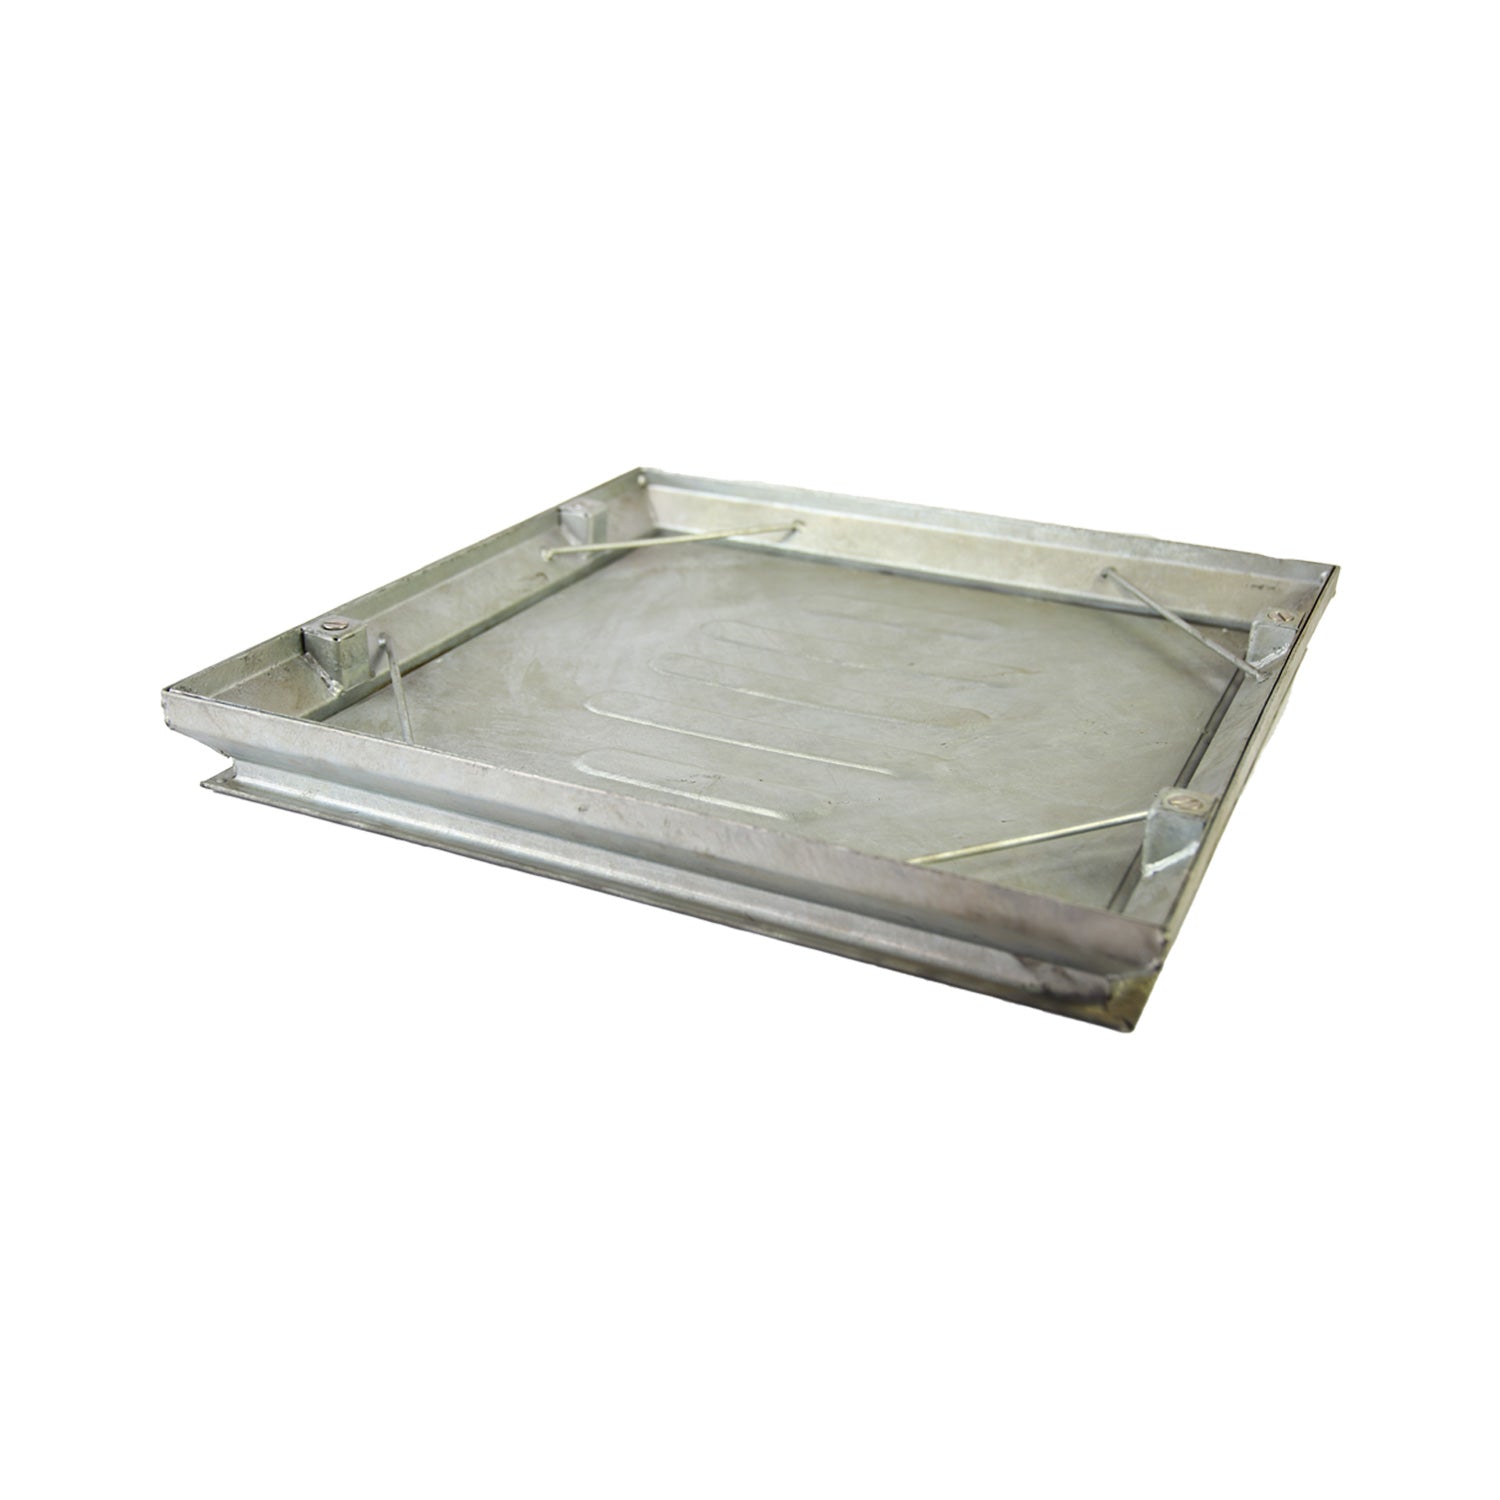 Double Seal Tray Type Manhole Cover 600mm x 450mm